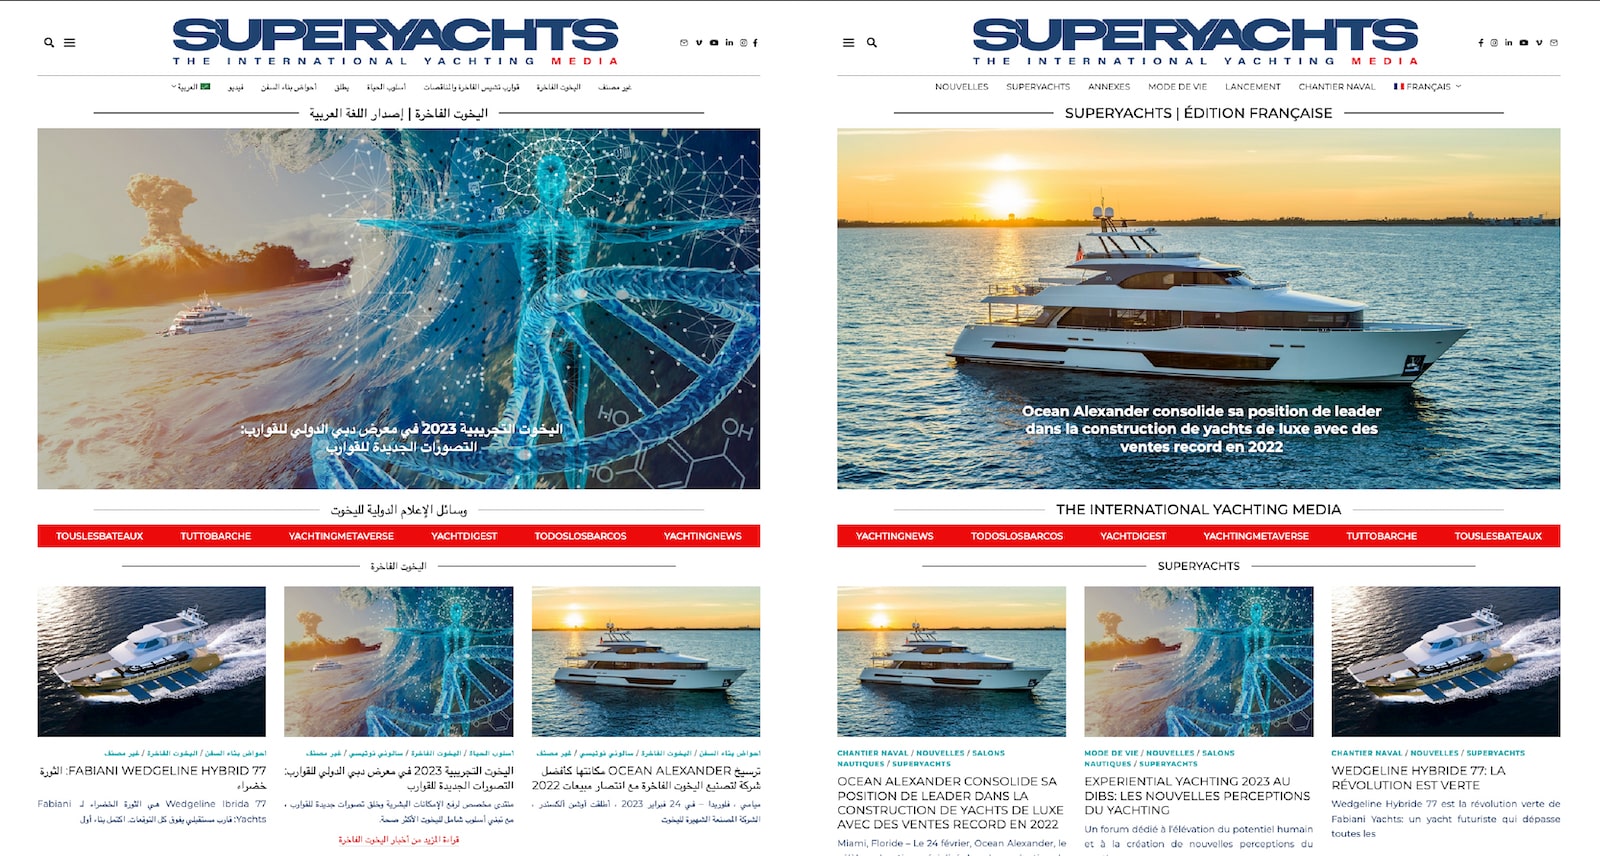 Superyachts: Arabic and French editions launched